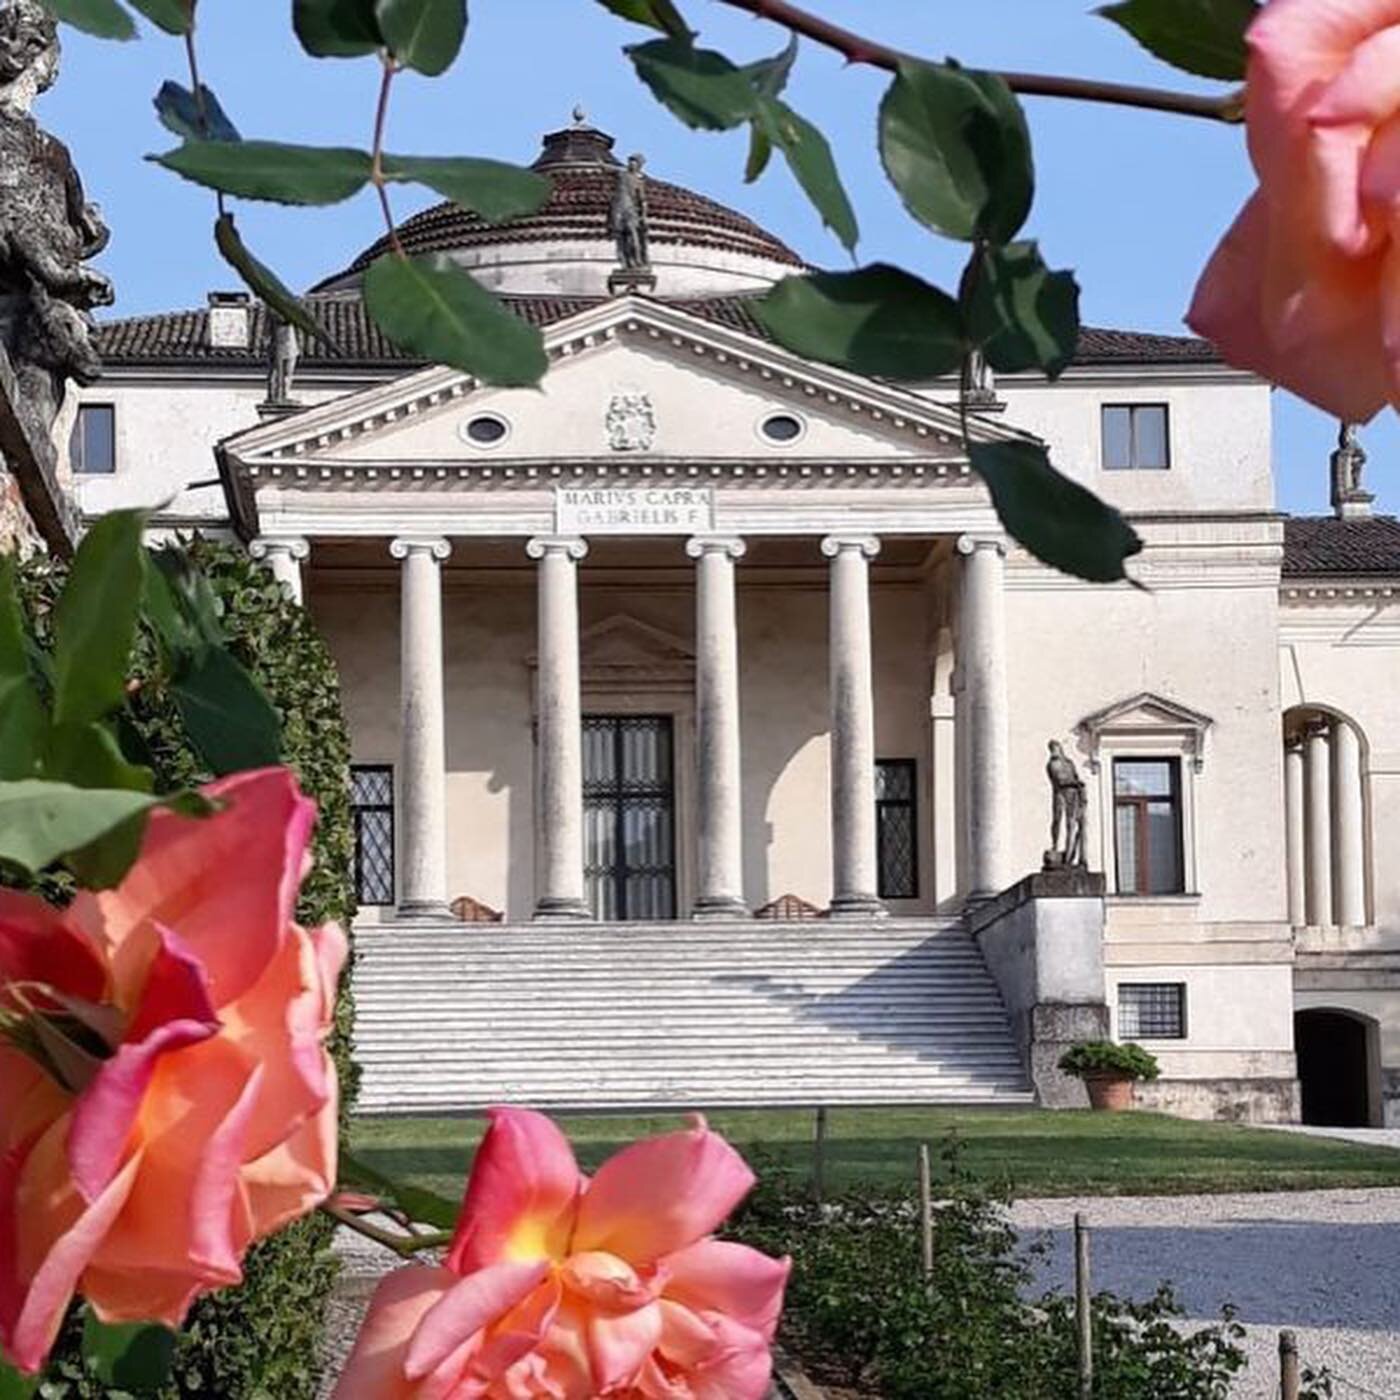 📸 Capturing Eternal Beauty: Palladio's Villa Rotunda 🏰✨

Step into the past and witness architectural brilliance at its finest! Probably one of the most significant buildings in history (and a personal favorite) Palladio's Villa Rotunda, a true Ren